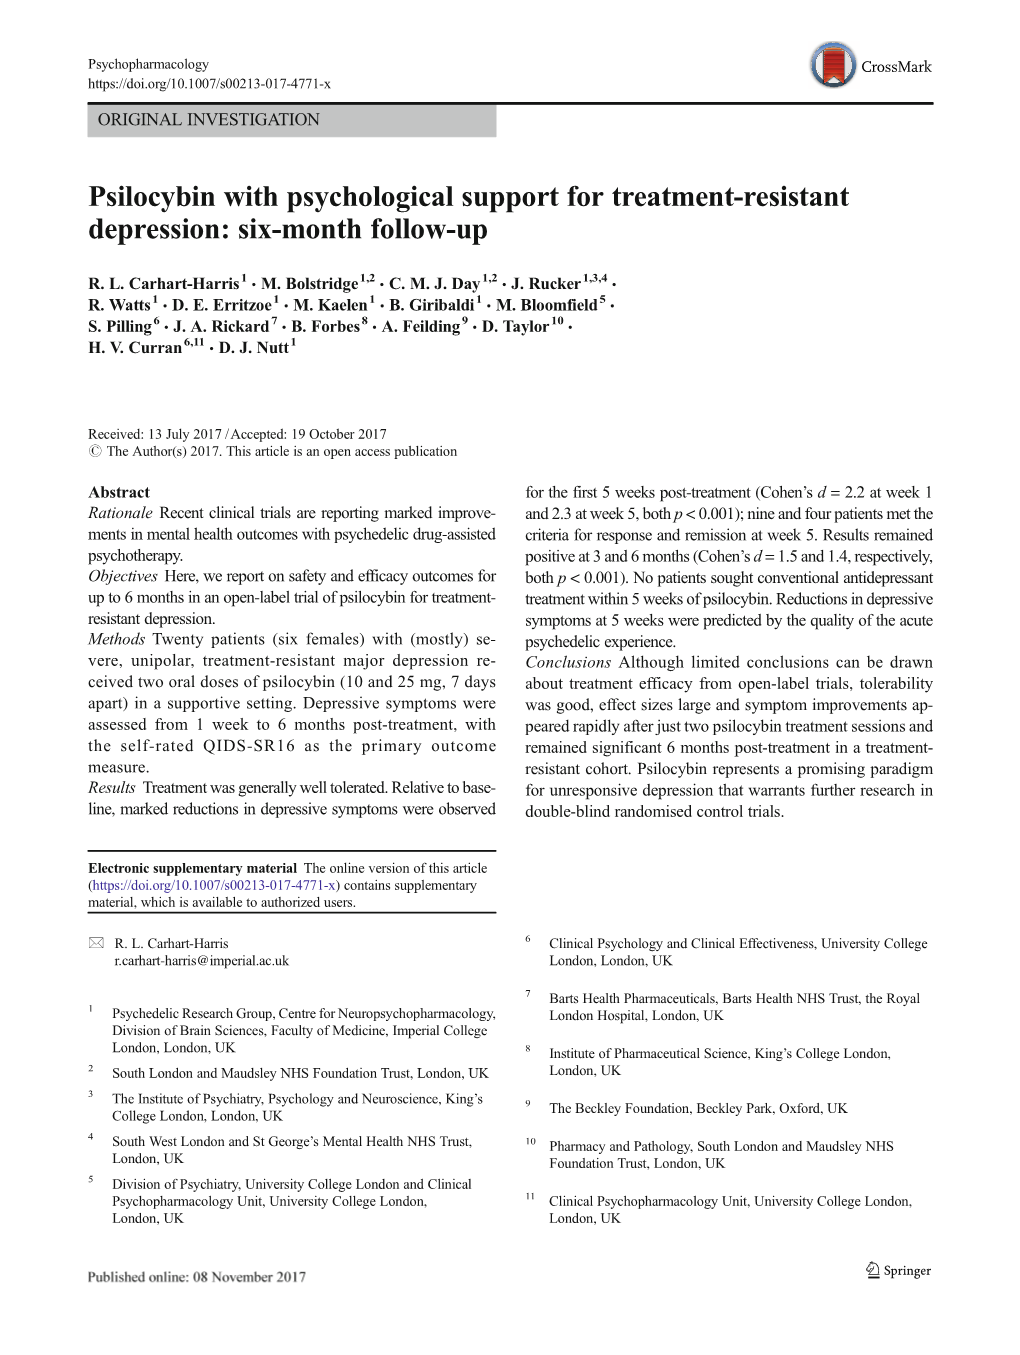 Psilocybin with Psychological Support for Treatment-Resistant Depression: Six-Month Follow-Up